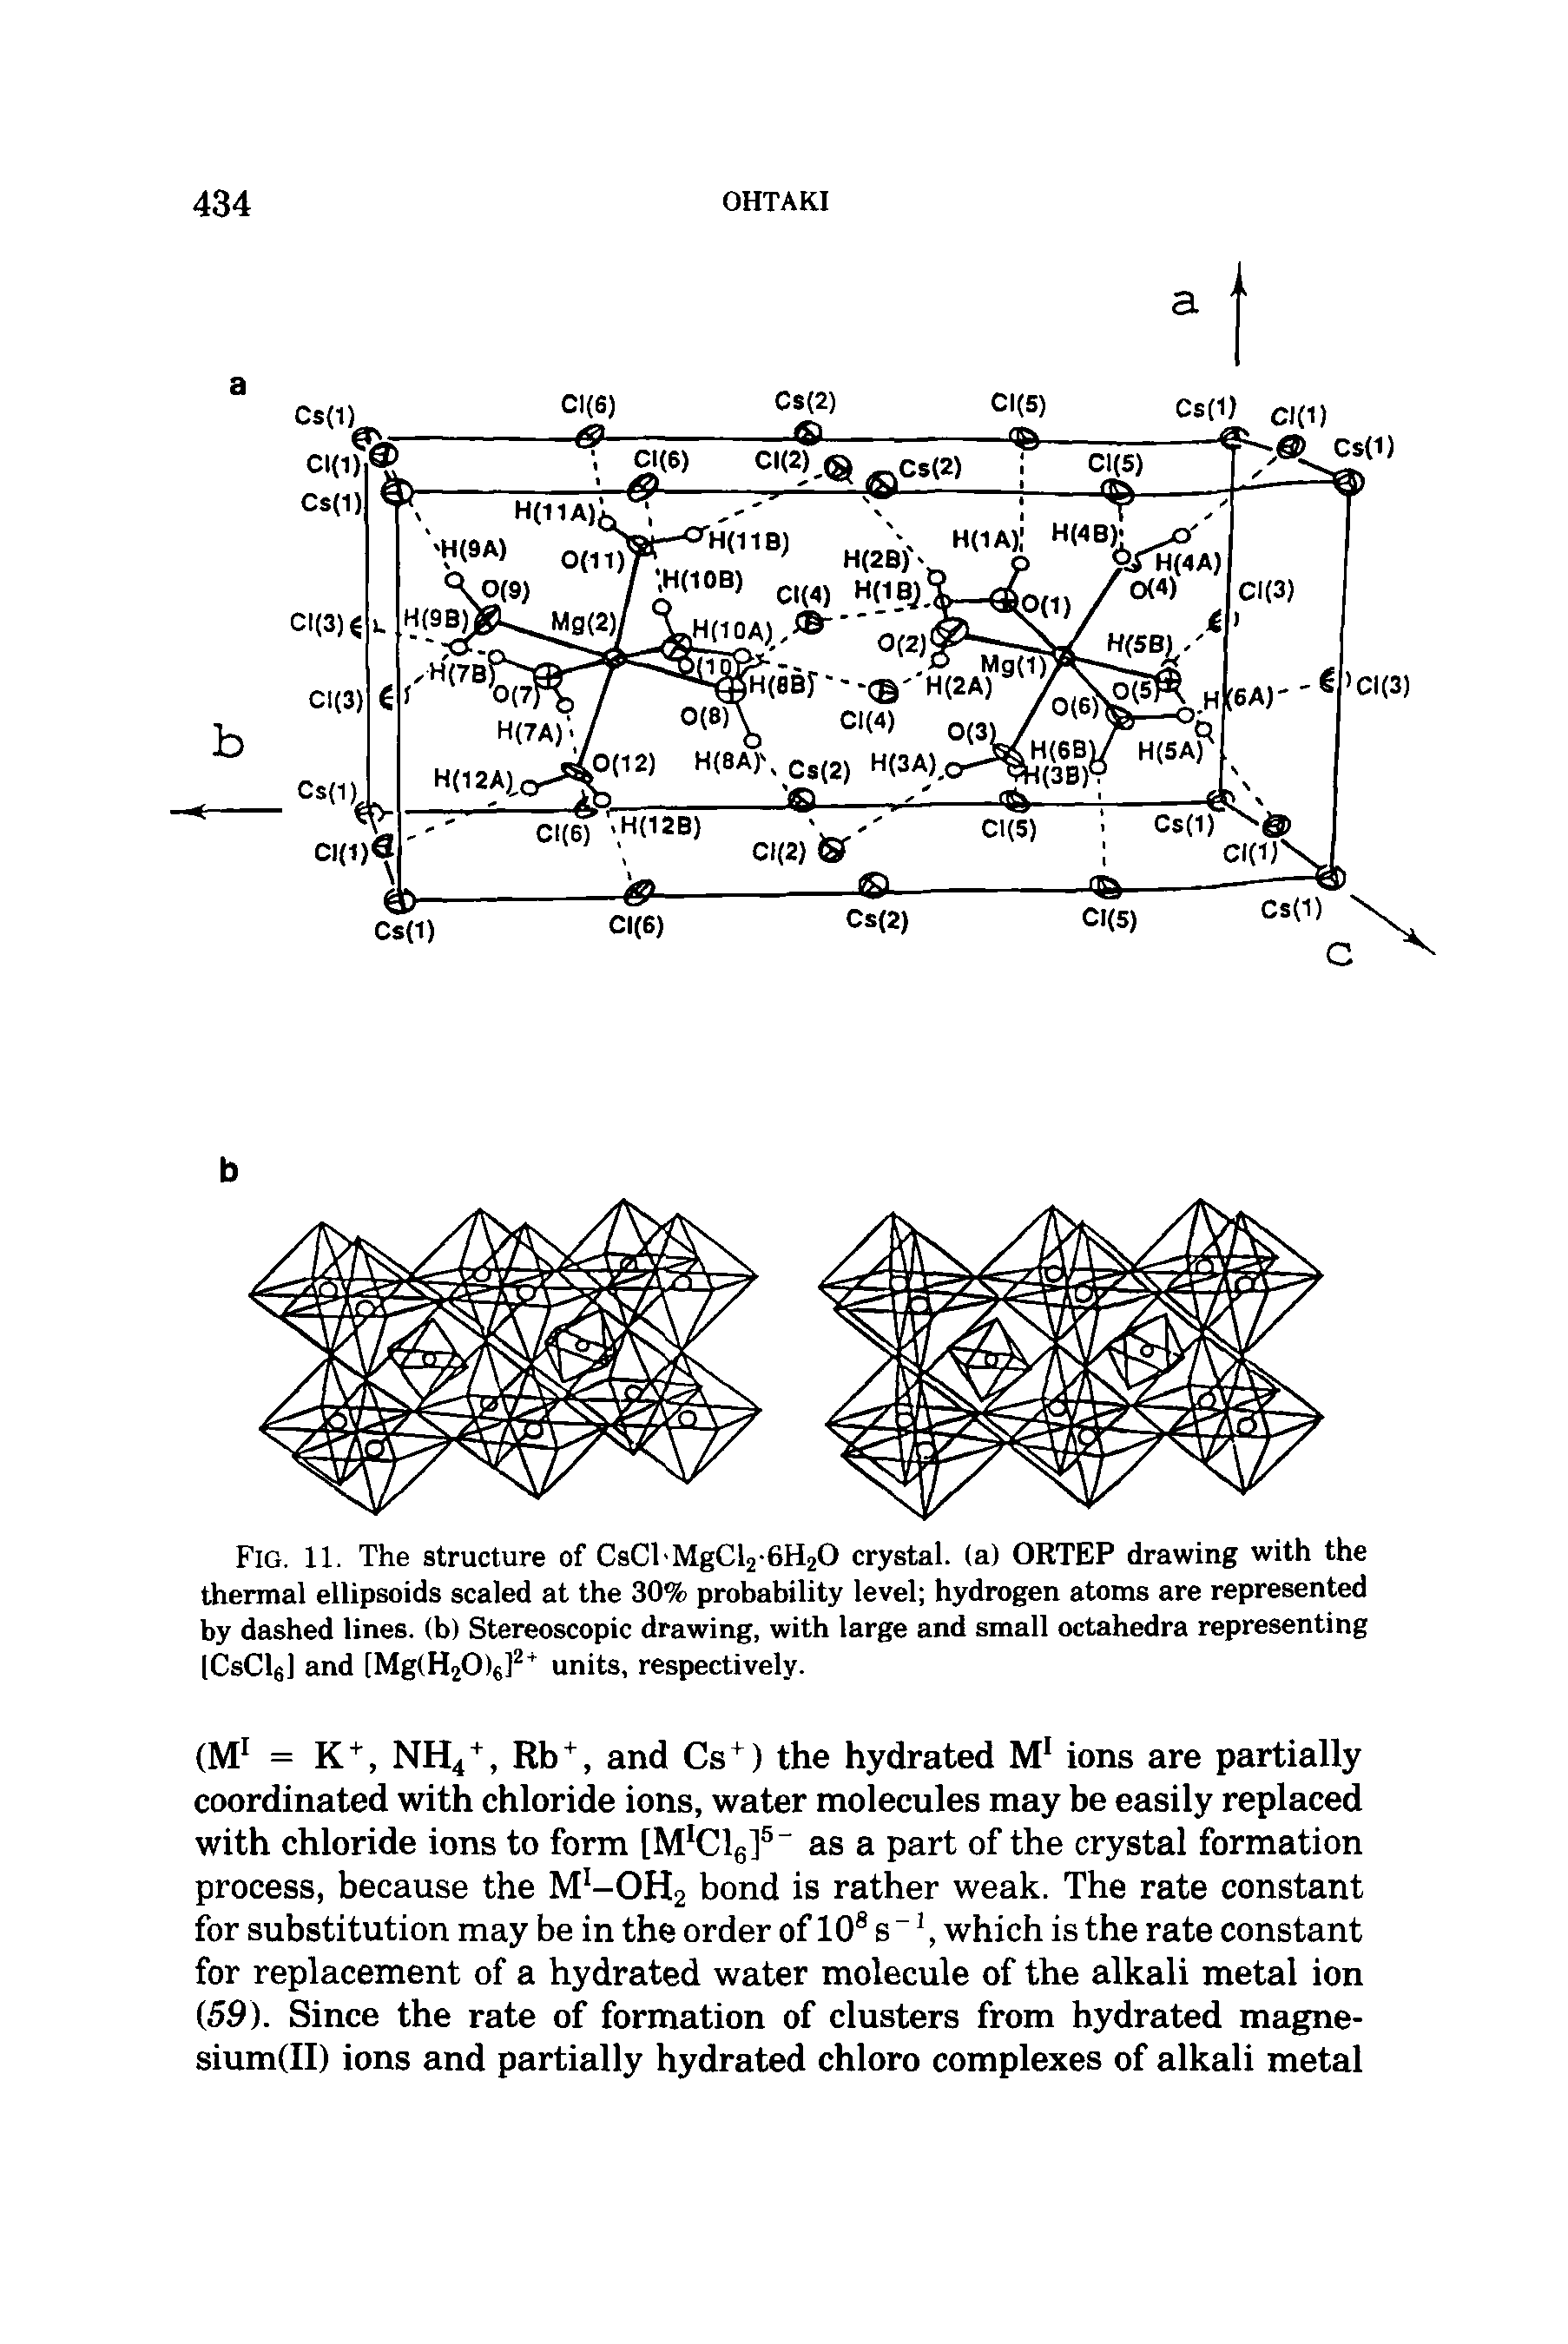 Fig. 11. The structure of CsCl MgCl2-6H20 crystal, (a) ORTEP drawing with the thermal ellipsoids scaled at the 30% probability level hydrogen atoms are represented by dashed lines, (b) Stereoscopic drawing, with large and small octahedra representing ICsClg] and [Mg(H20)6]2+ units, respectively.